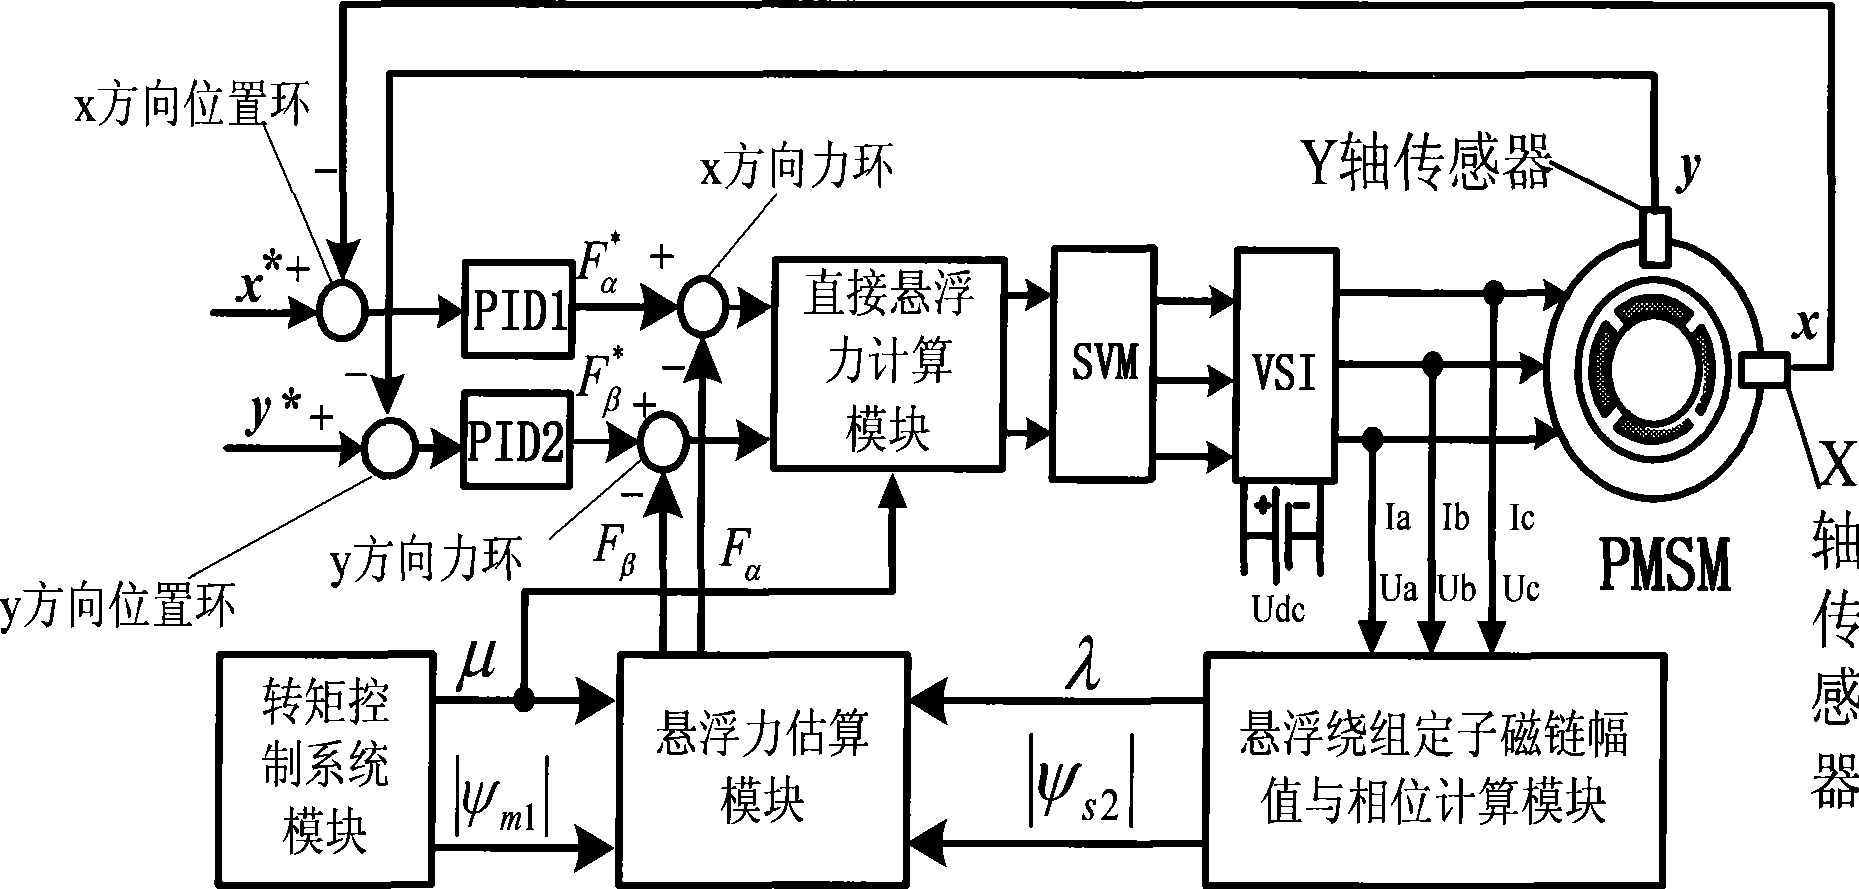 Direct suspending power control method for permanent magnet type non-bearing motor